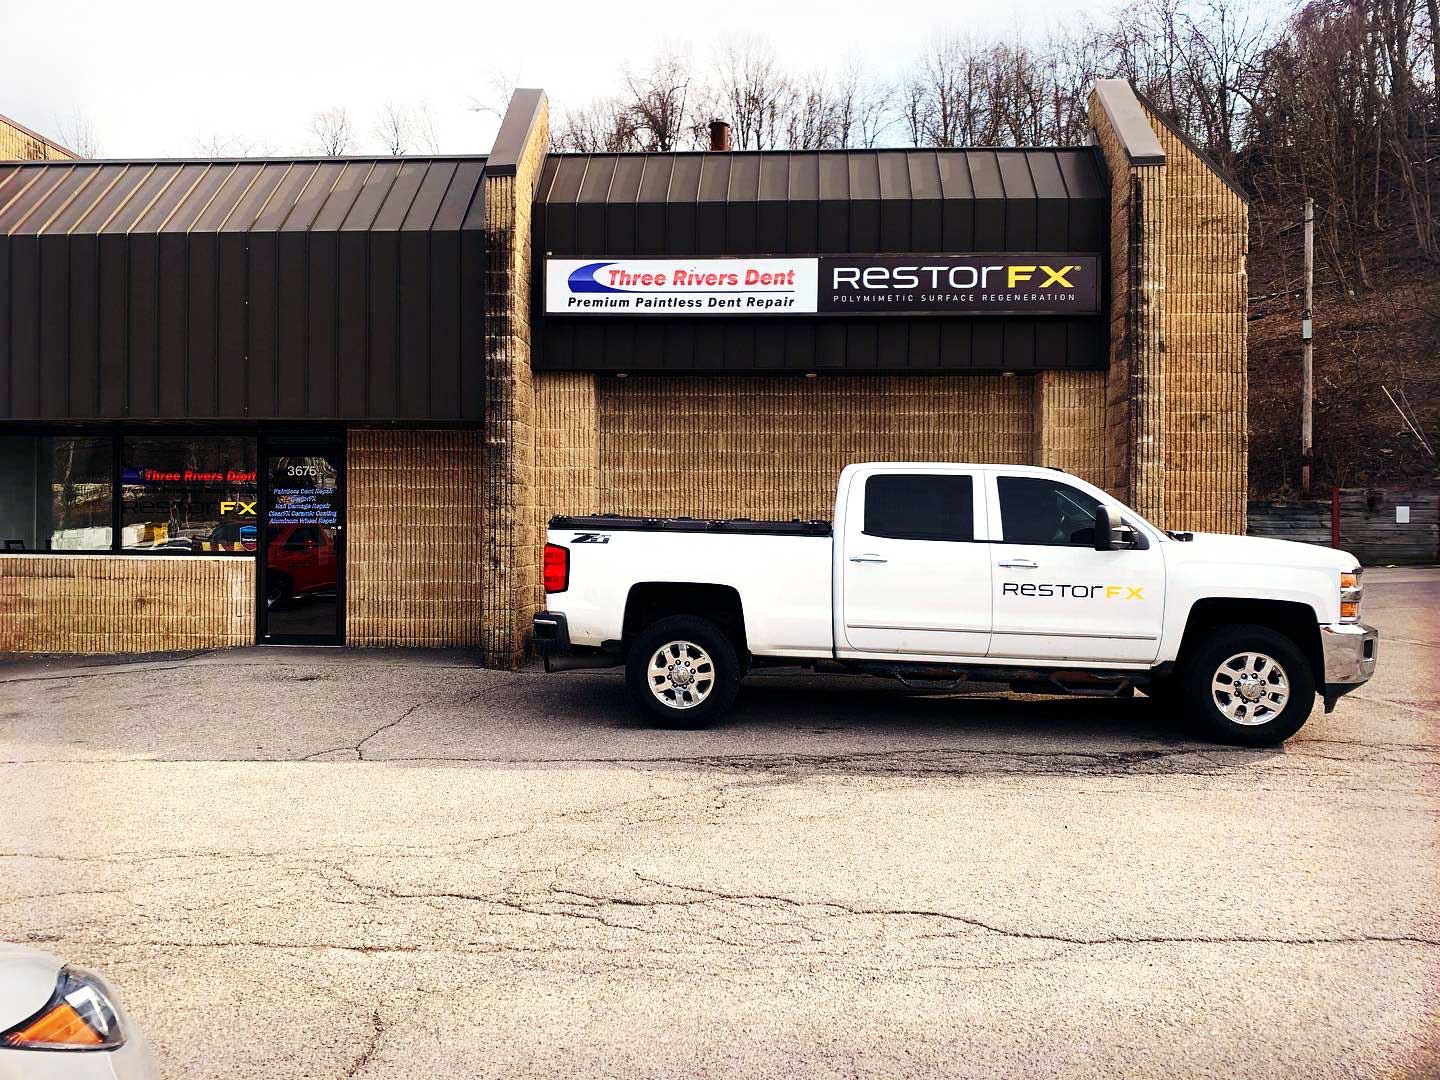 Branded white truck at RestorFX Pittsburgh storefront with brickwalls, signage and glass panels